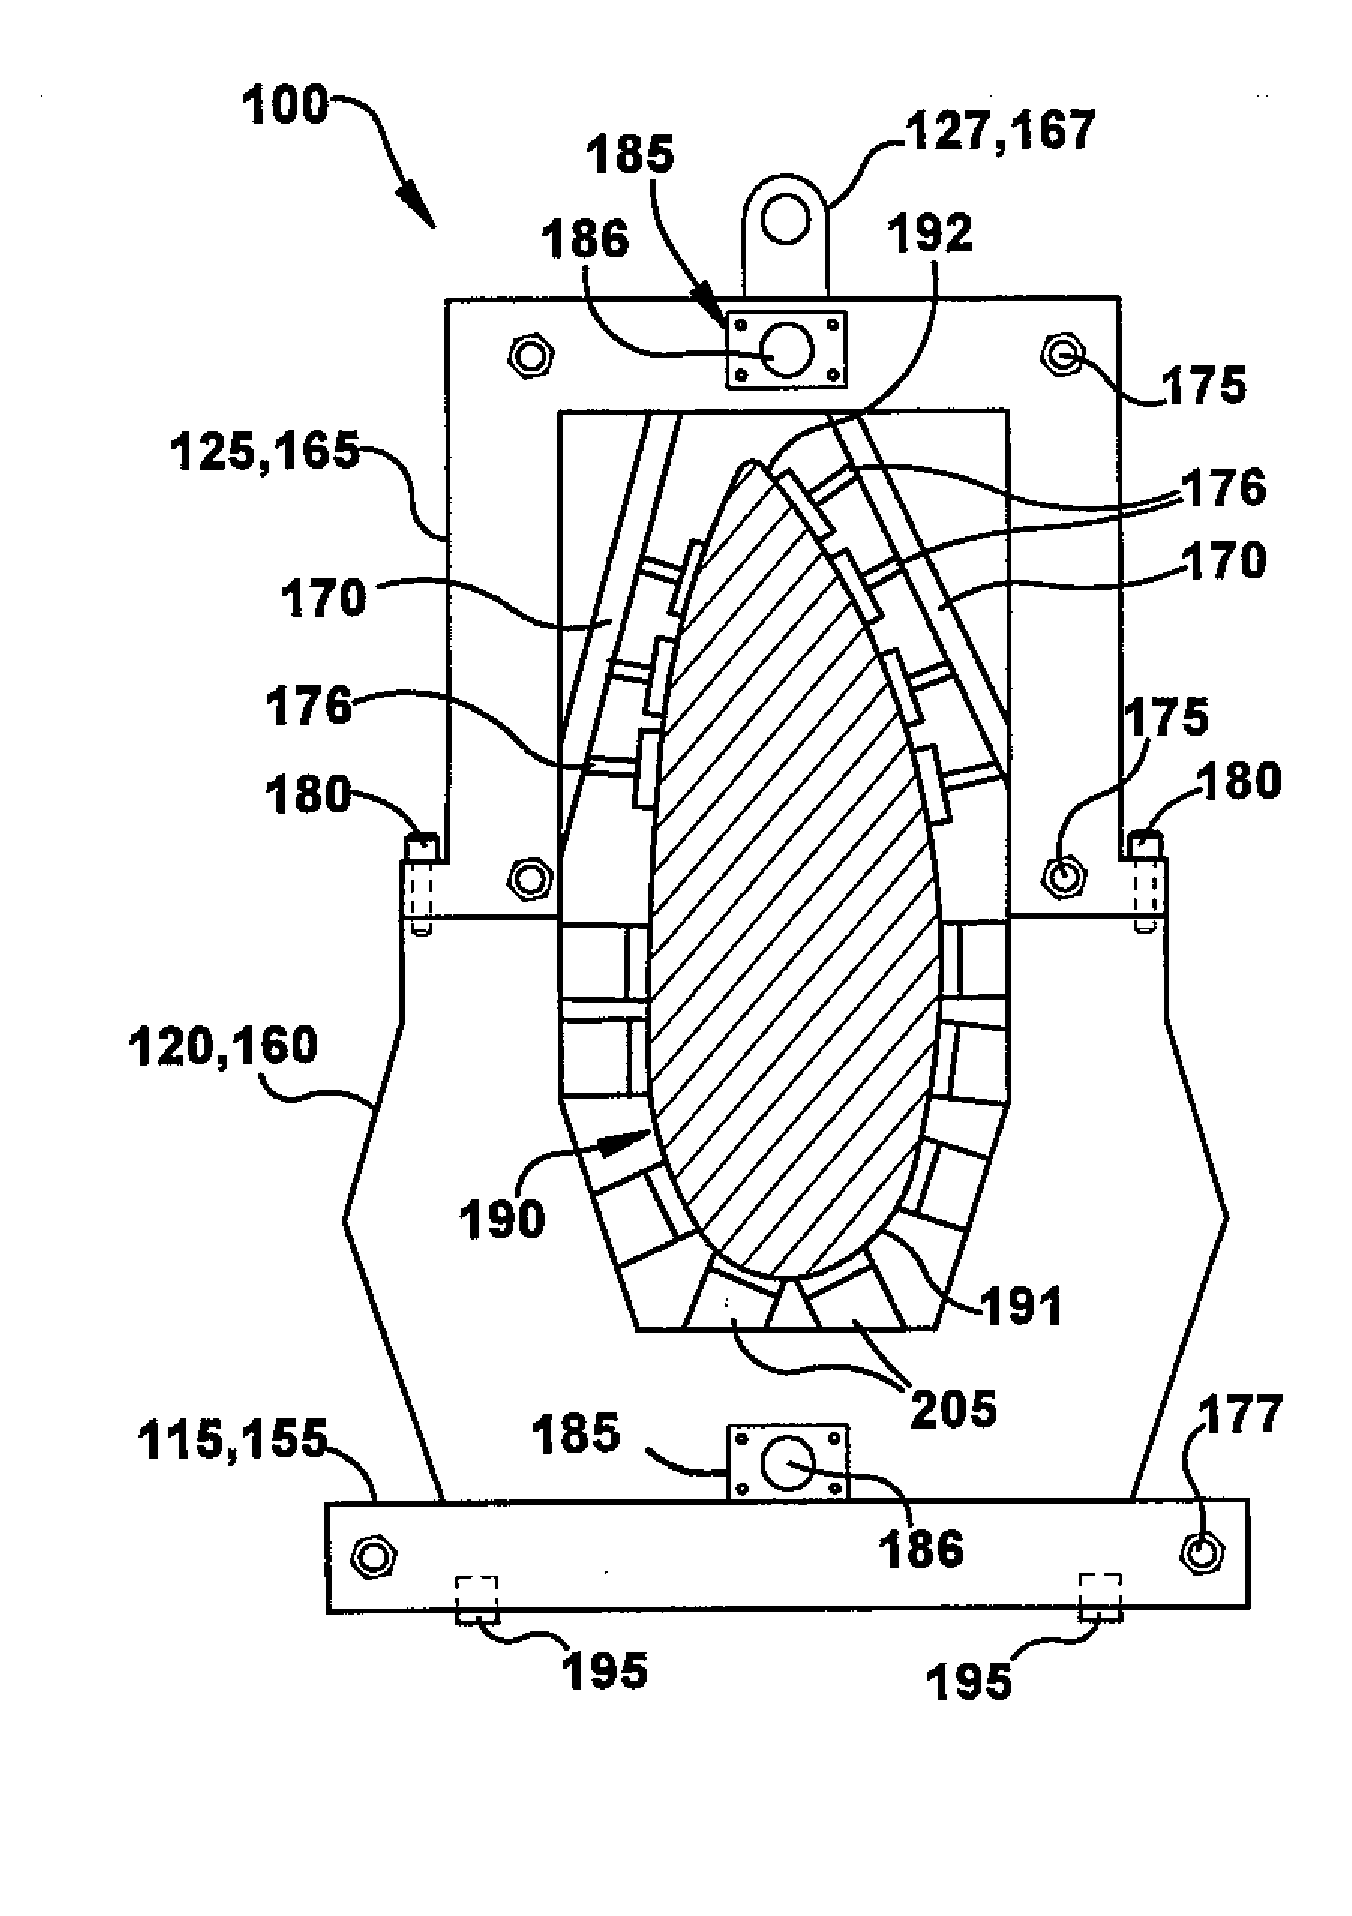 Integrated shipping fixture and assembly method for jointed wind turbine blades